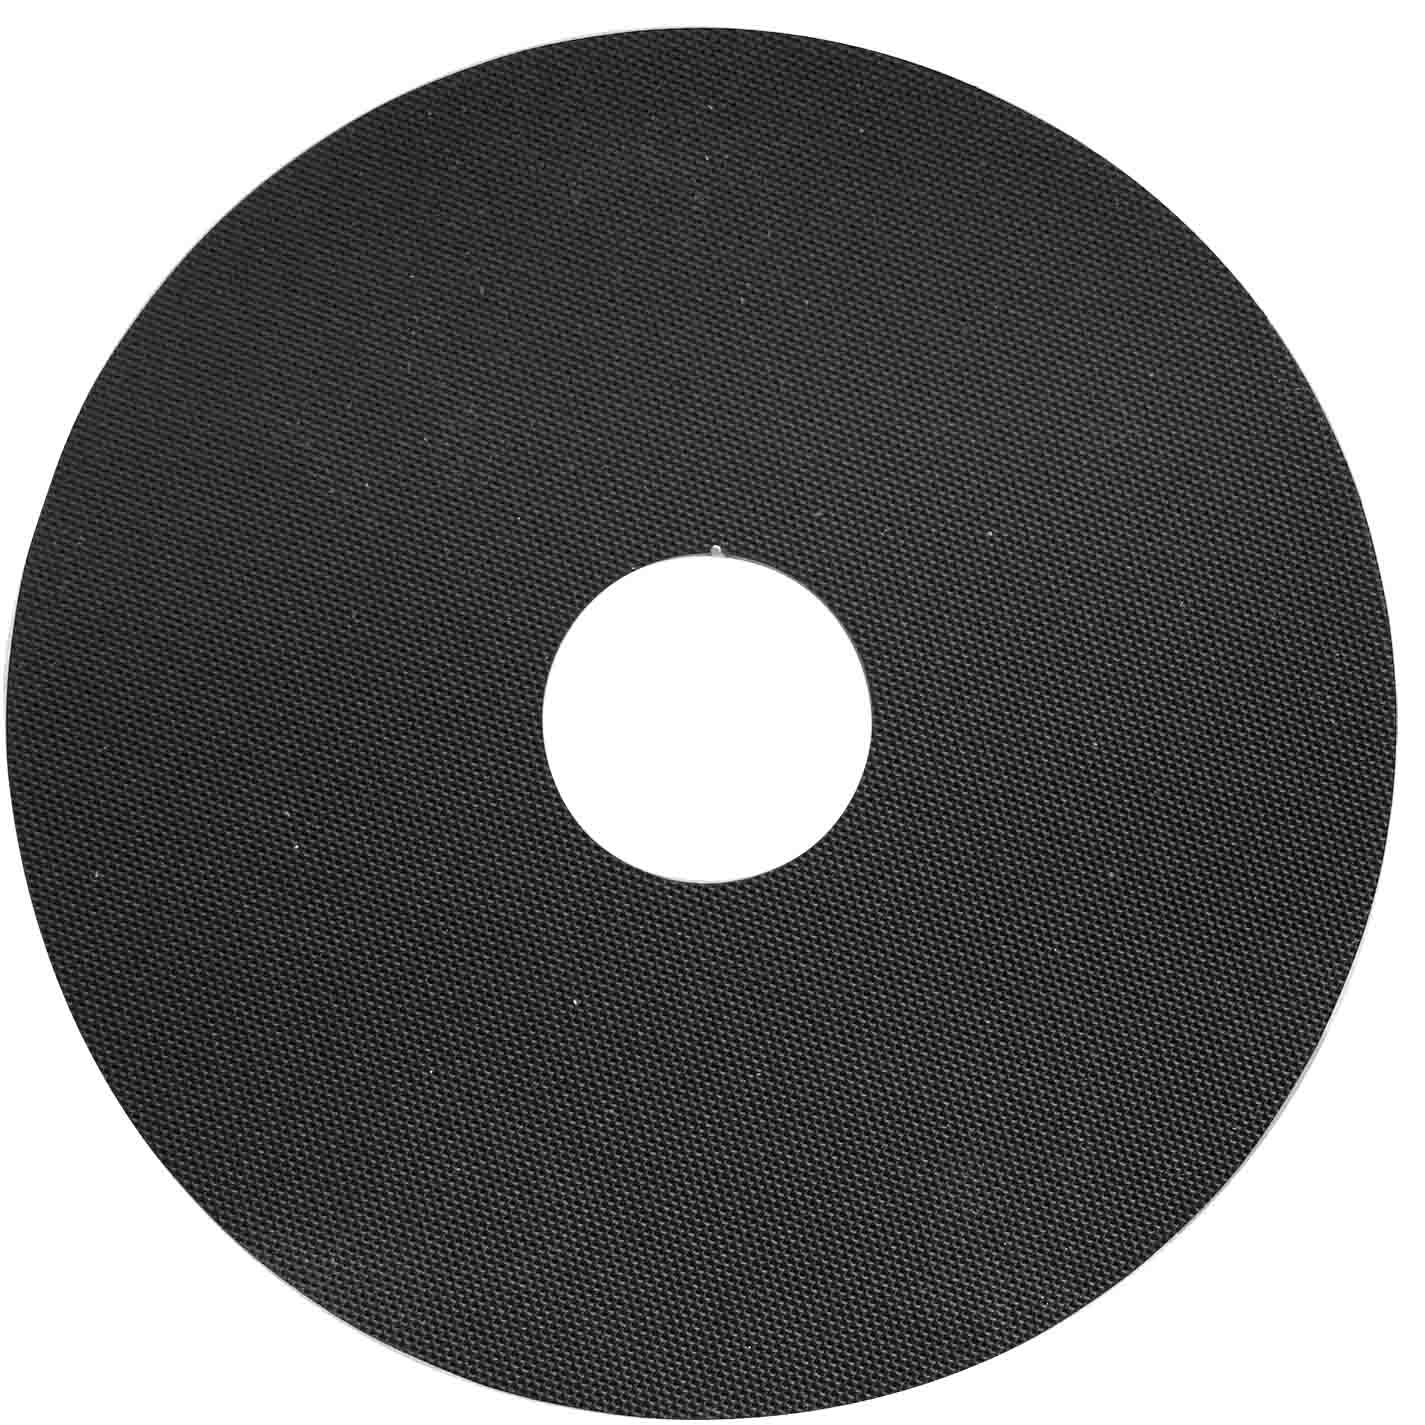 11669 - Rubber Friction Plate